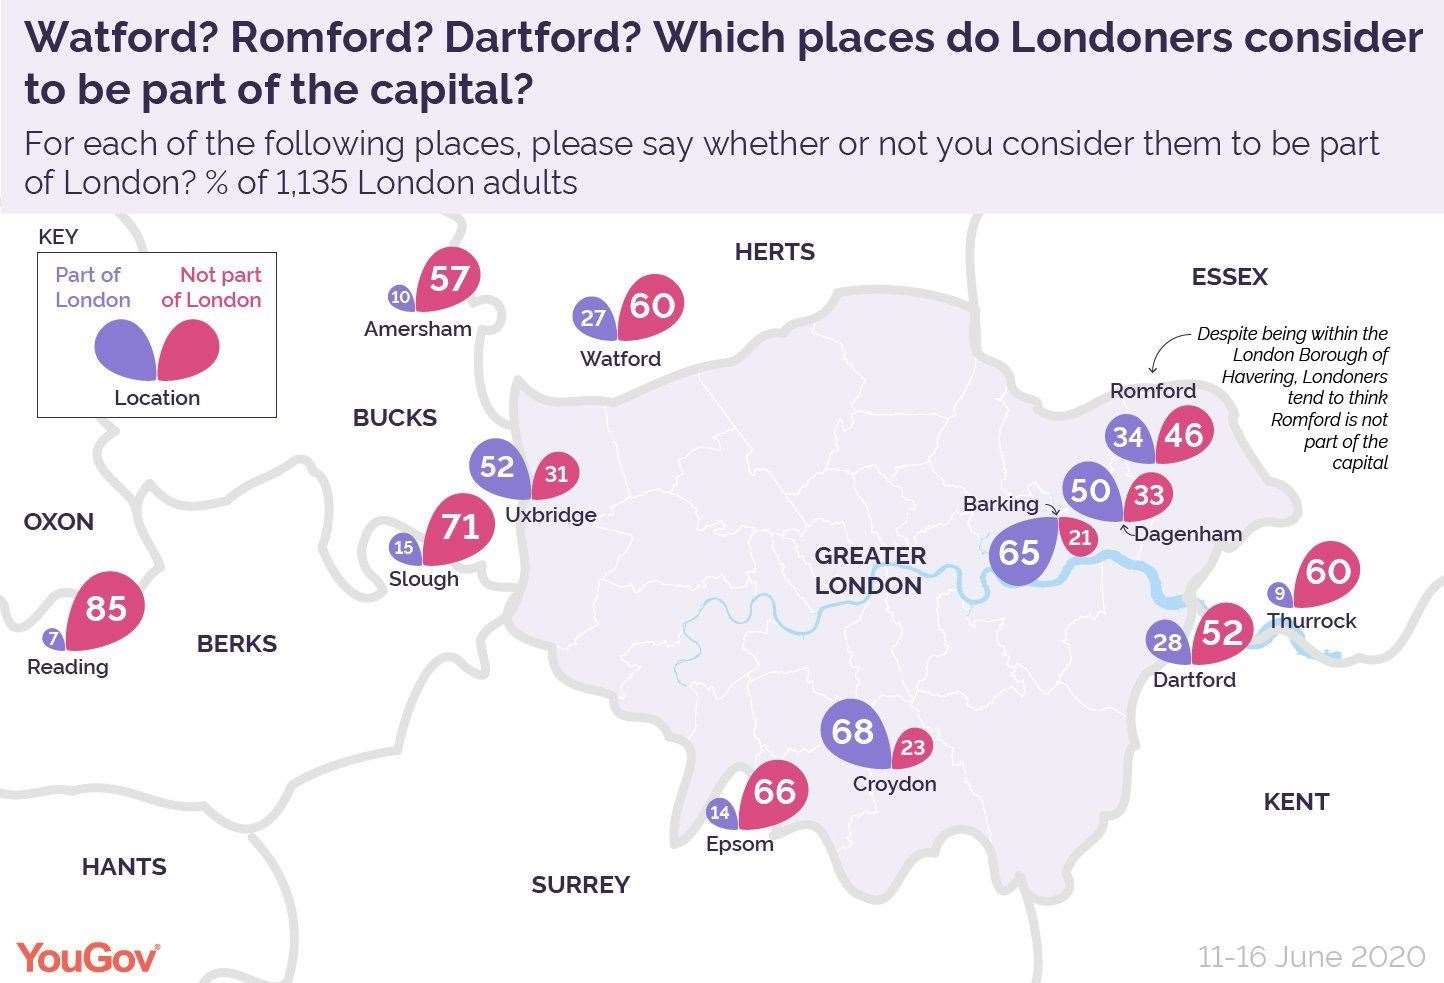 A YouGov poll suggested one in four Londoners believe Dartford to be part of the capital. Photo: YouGov